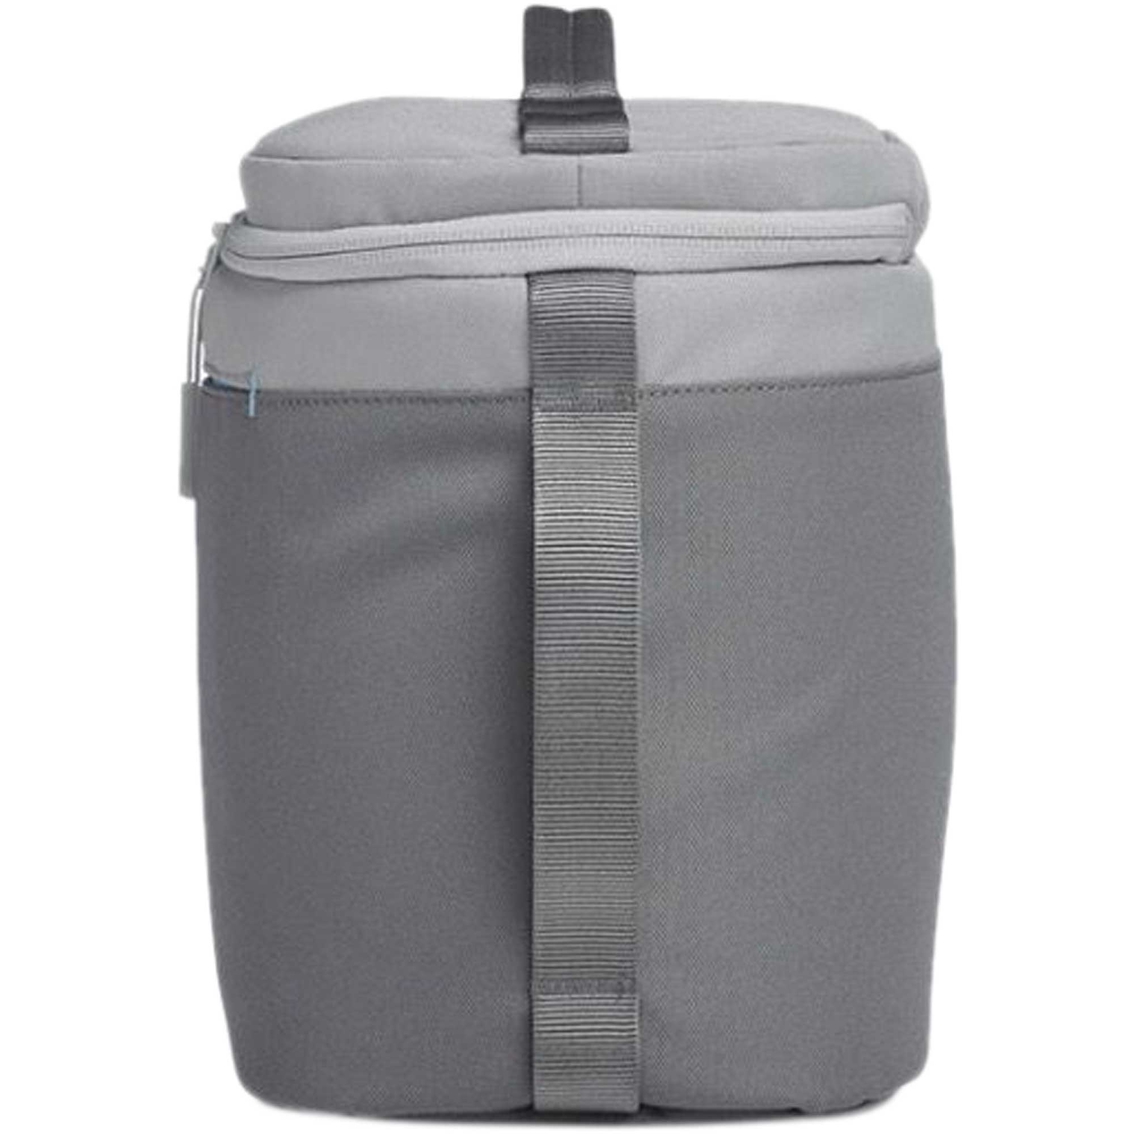 Hydro Flask 8L Insulated Lunch Bag - Image 2 of 4